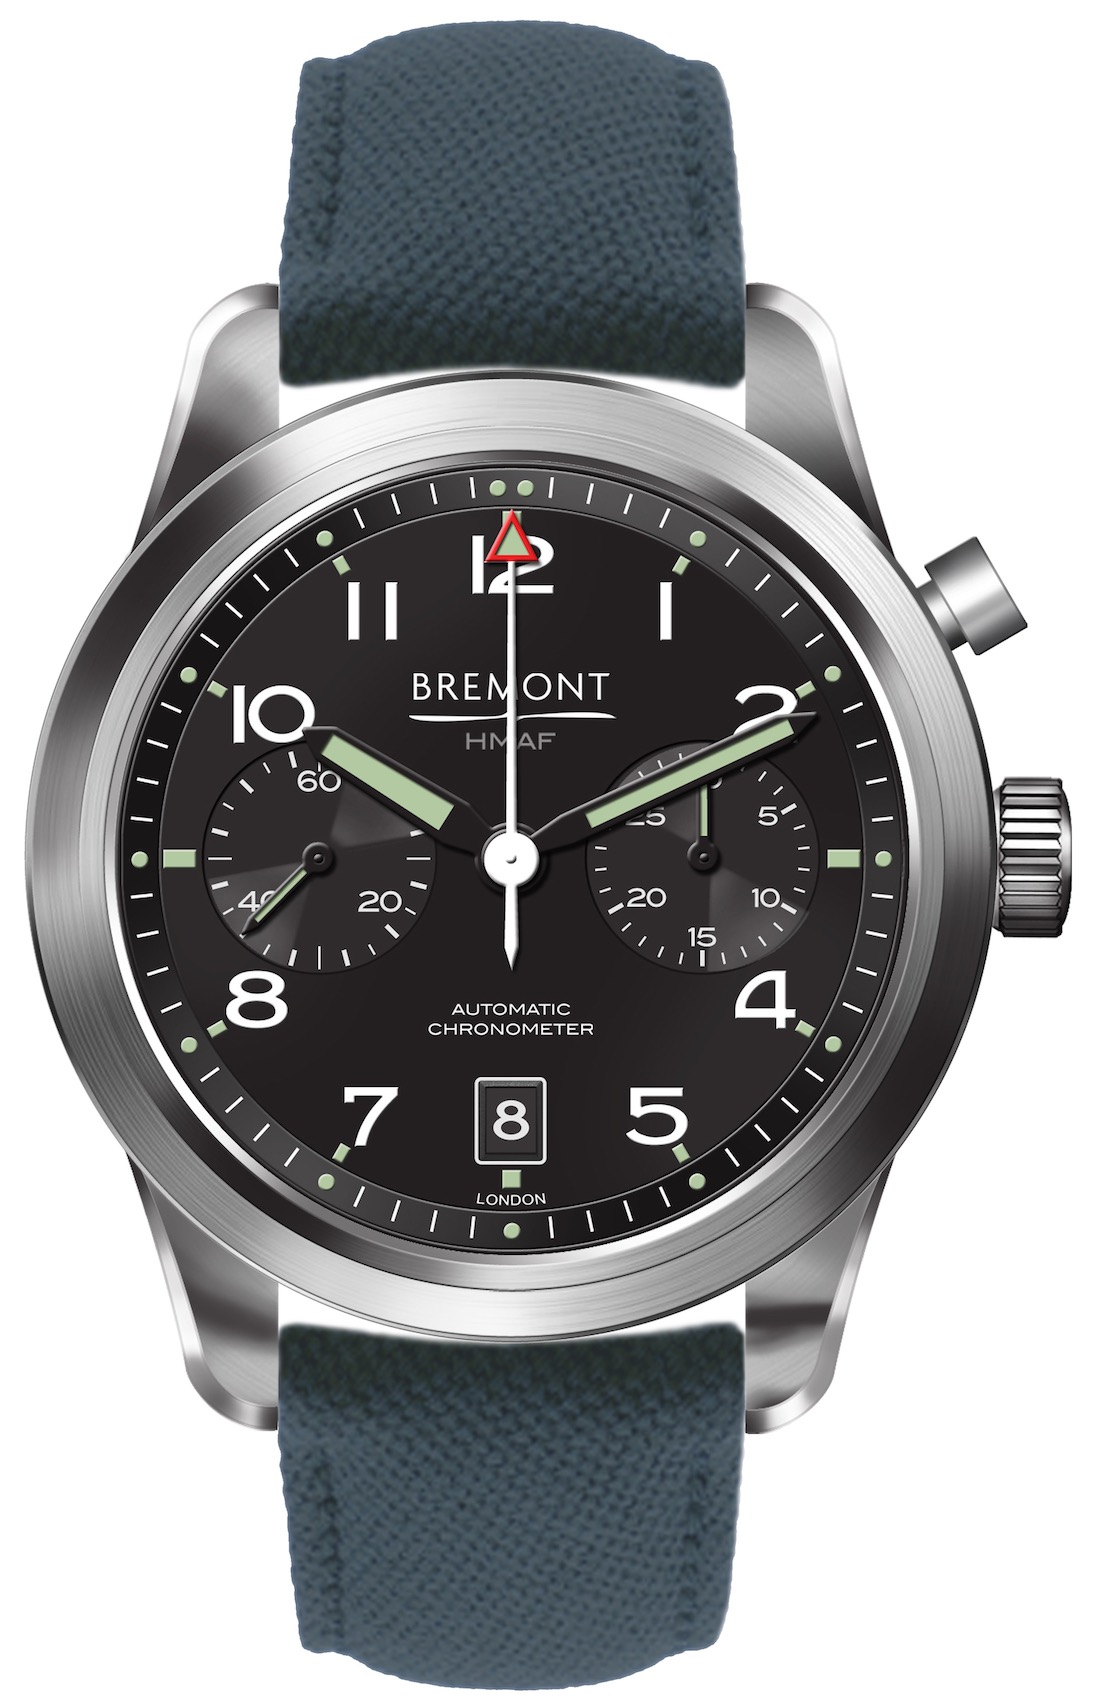 Bremont's new Armed Forces "Ministry of Defense" Collection Bremont-Arrow